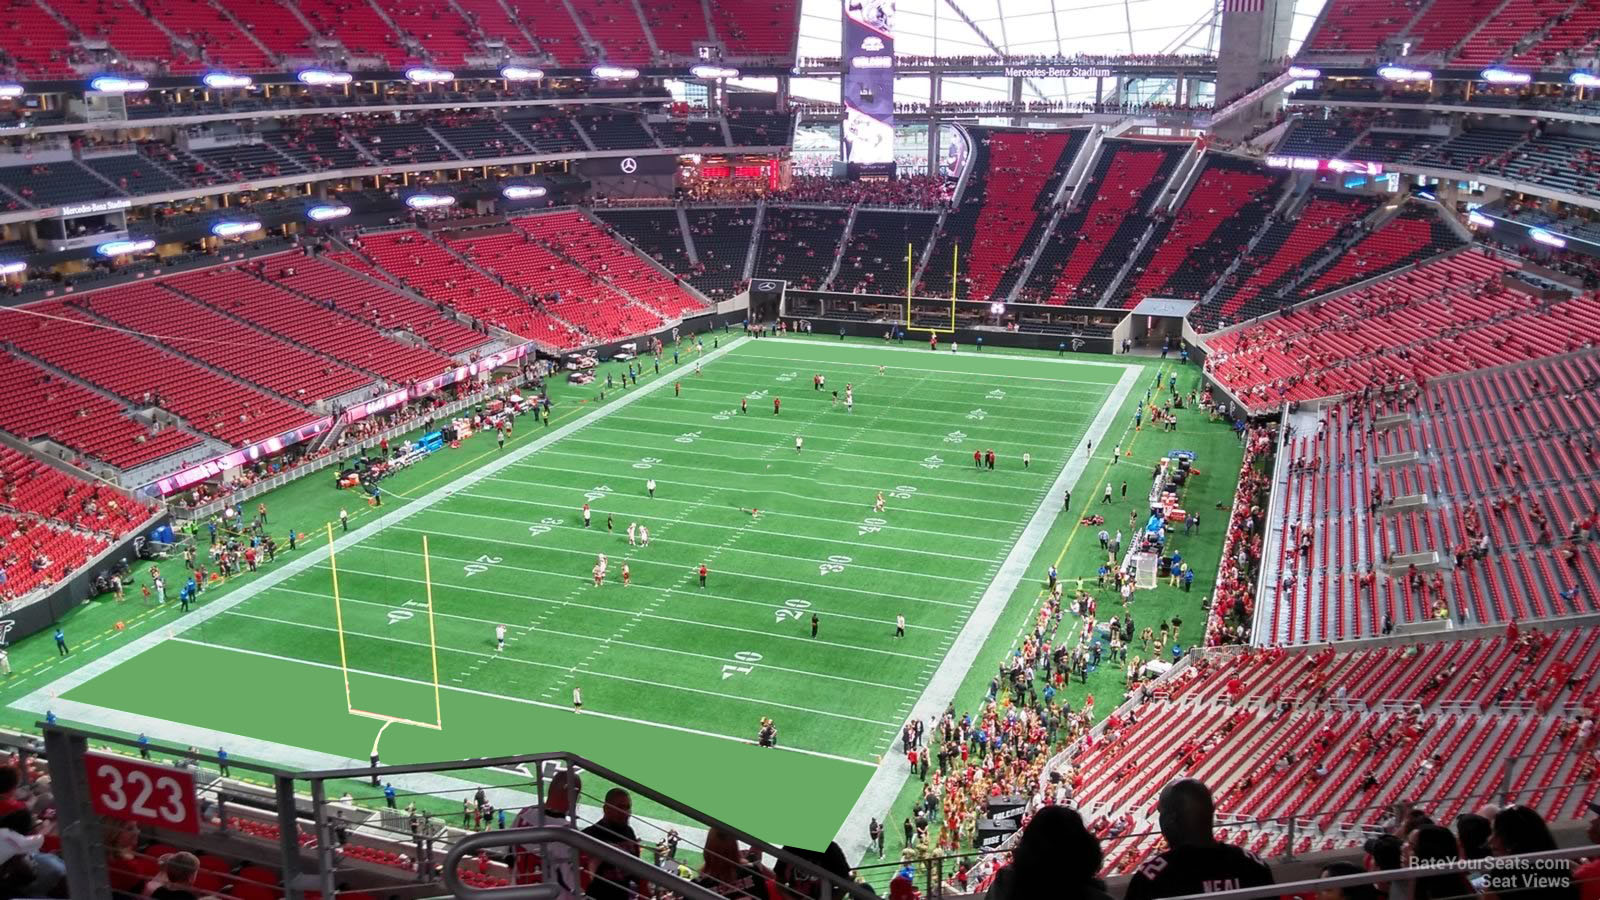 section 322, row 12 seat view  for football - mercedes-benz stadium